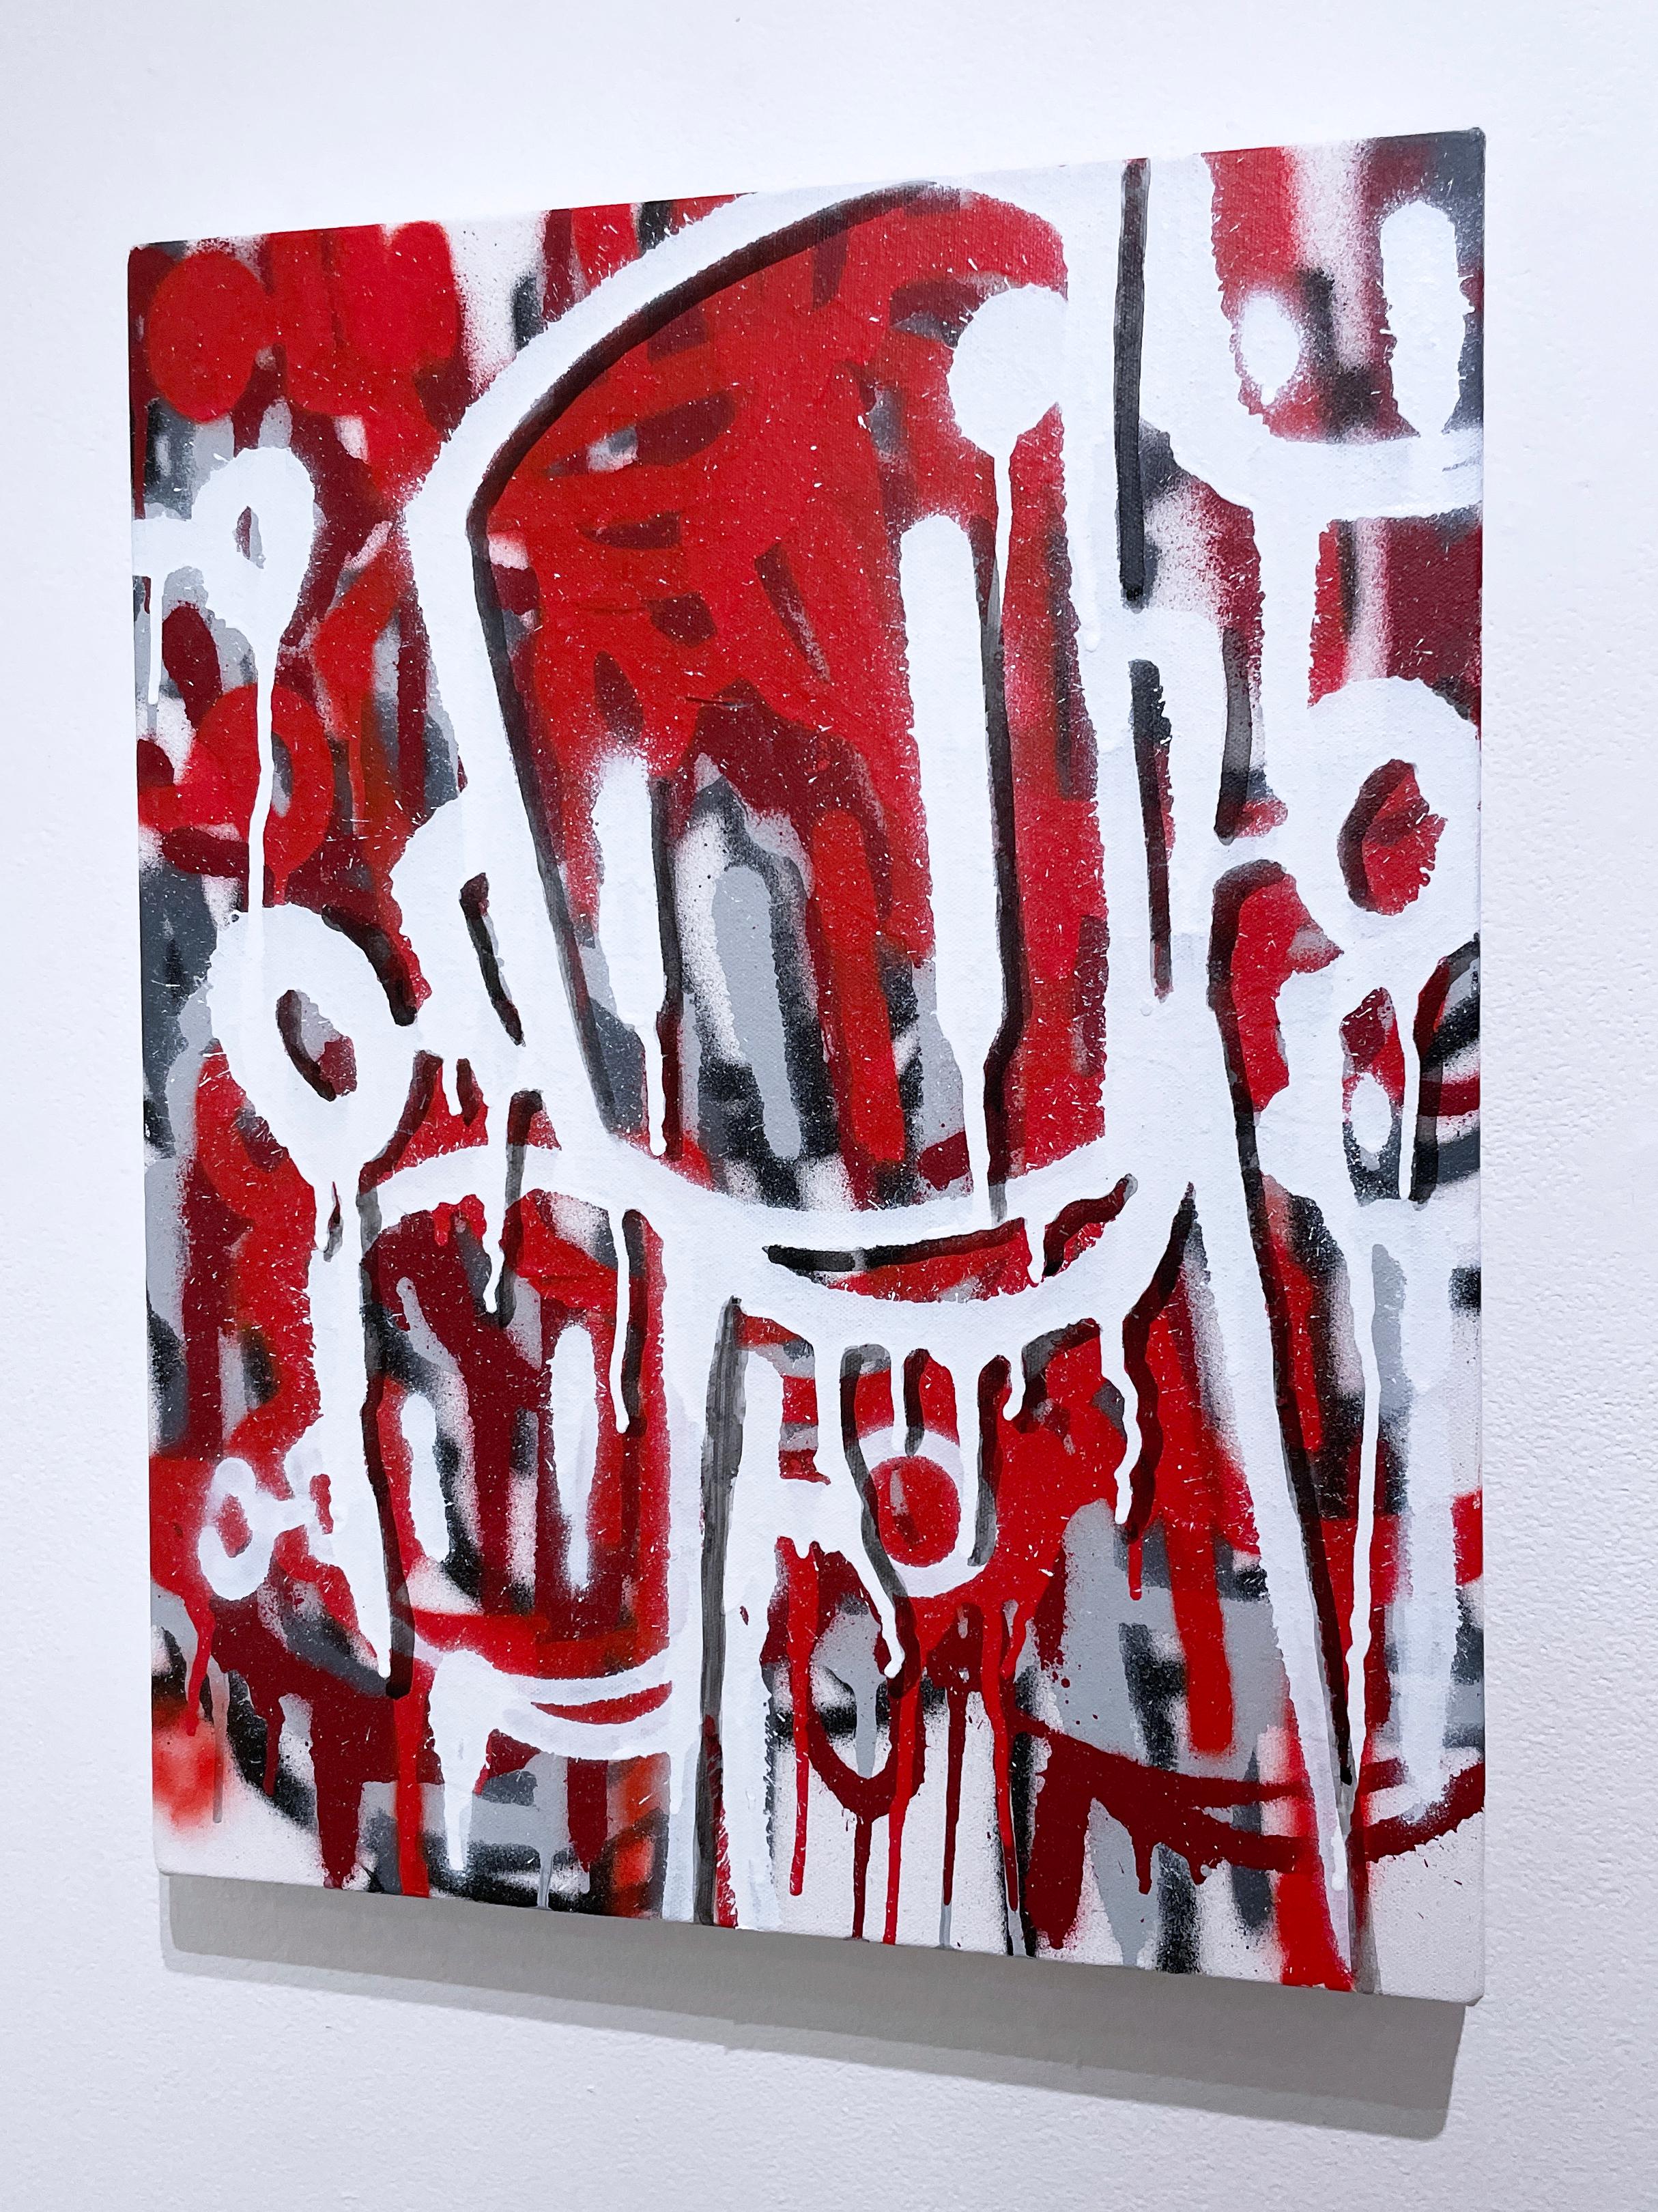 Memories or Ghosts by Chris RWK, street art, graffiti, spray paint, red & white For Sale 1